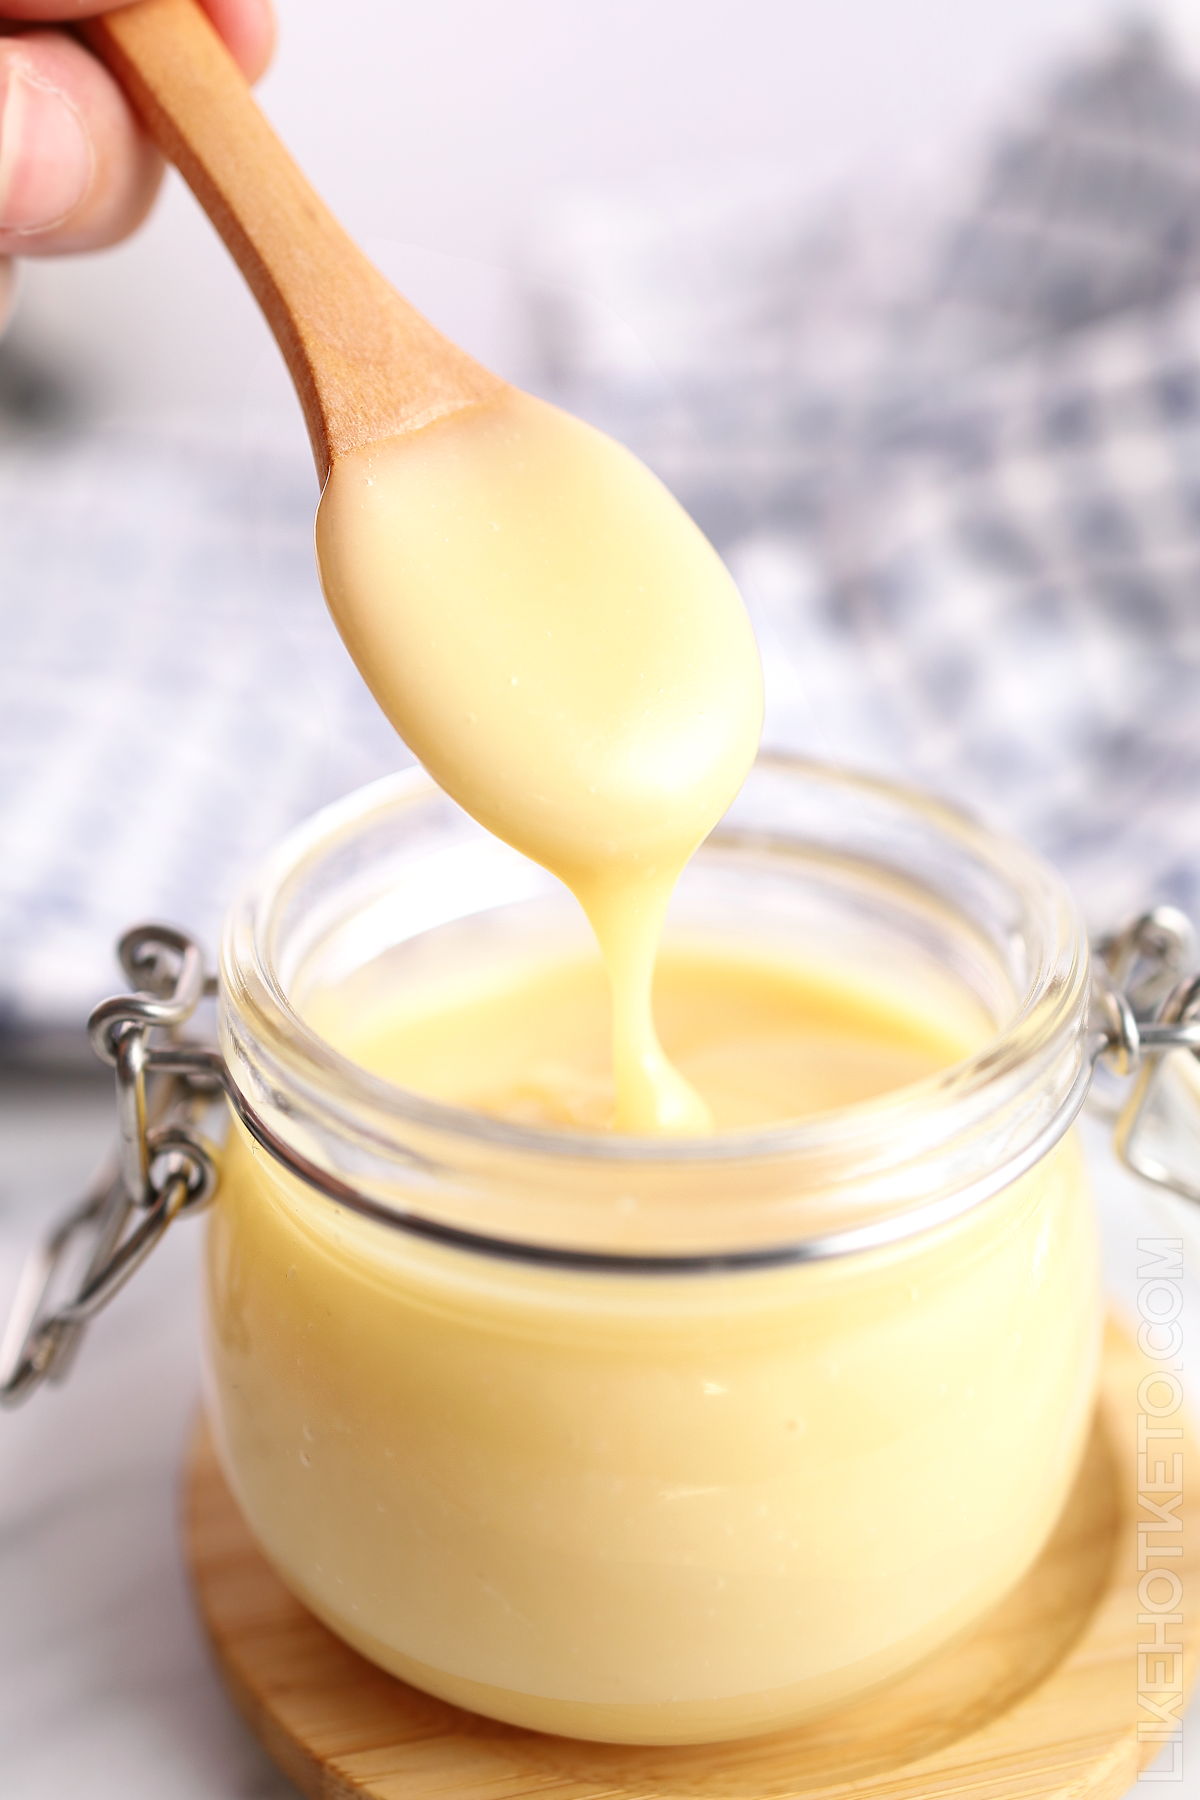 Homemade keto condensed milk getting spooned out of a mason jar.